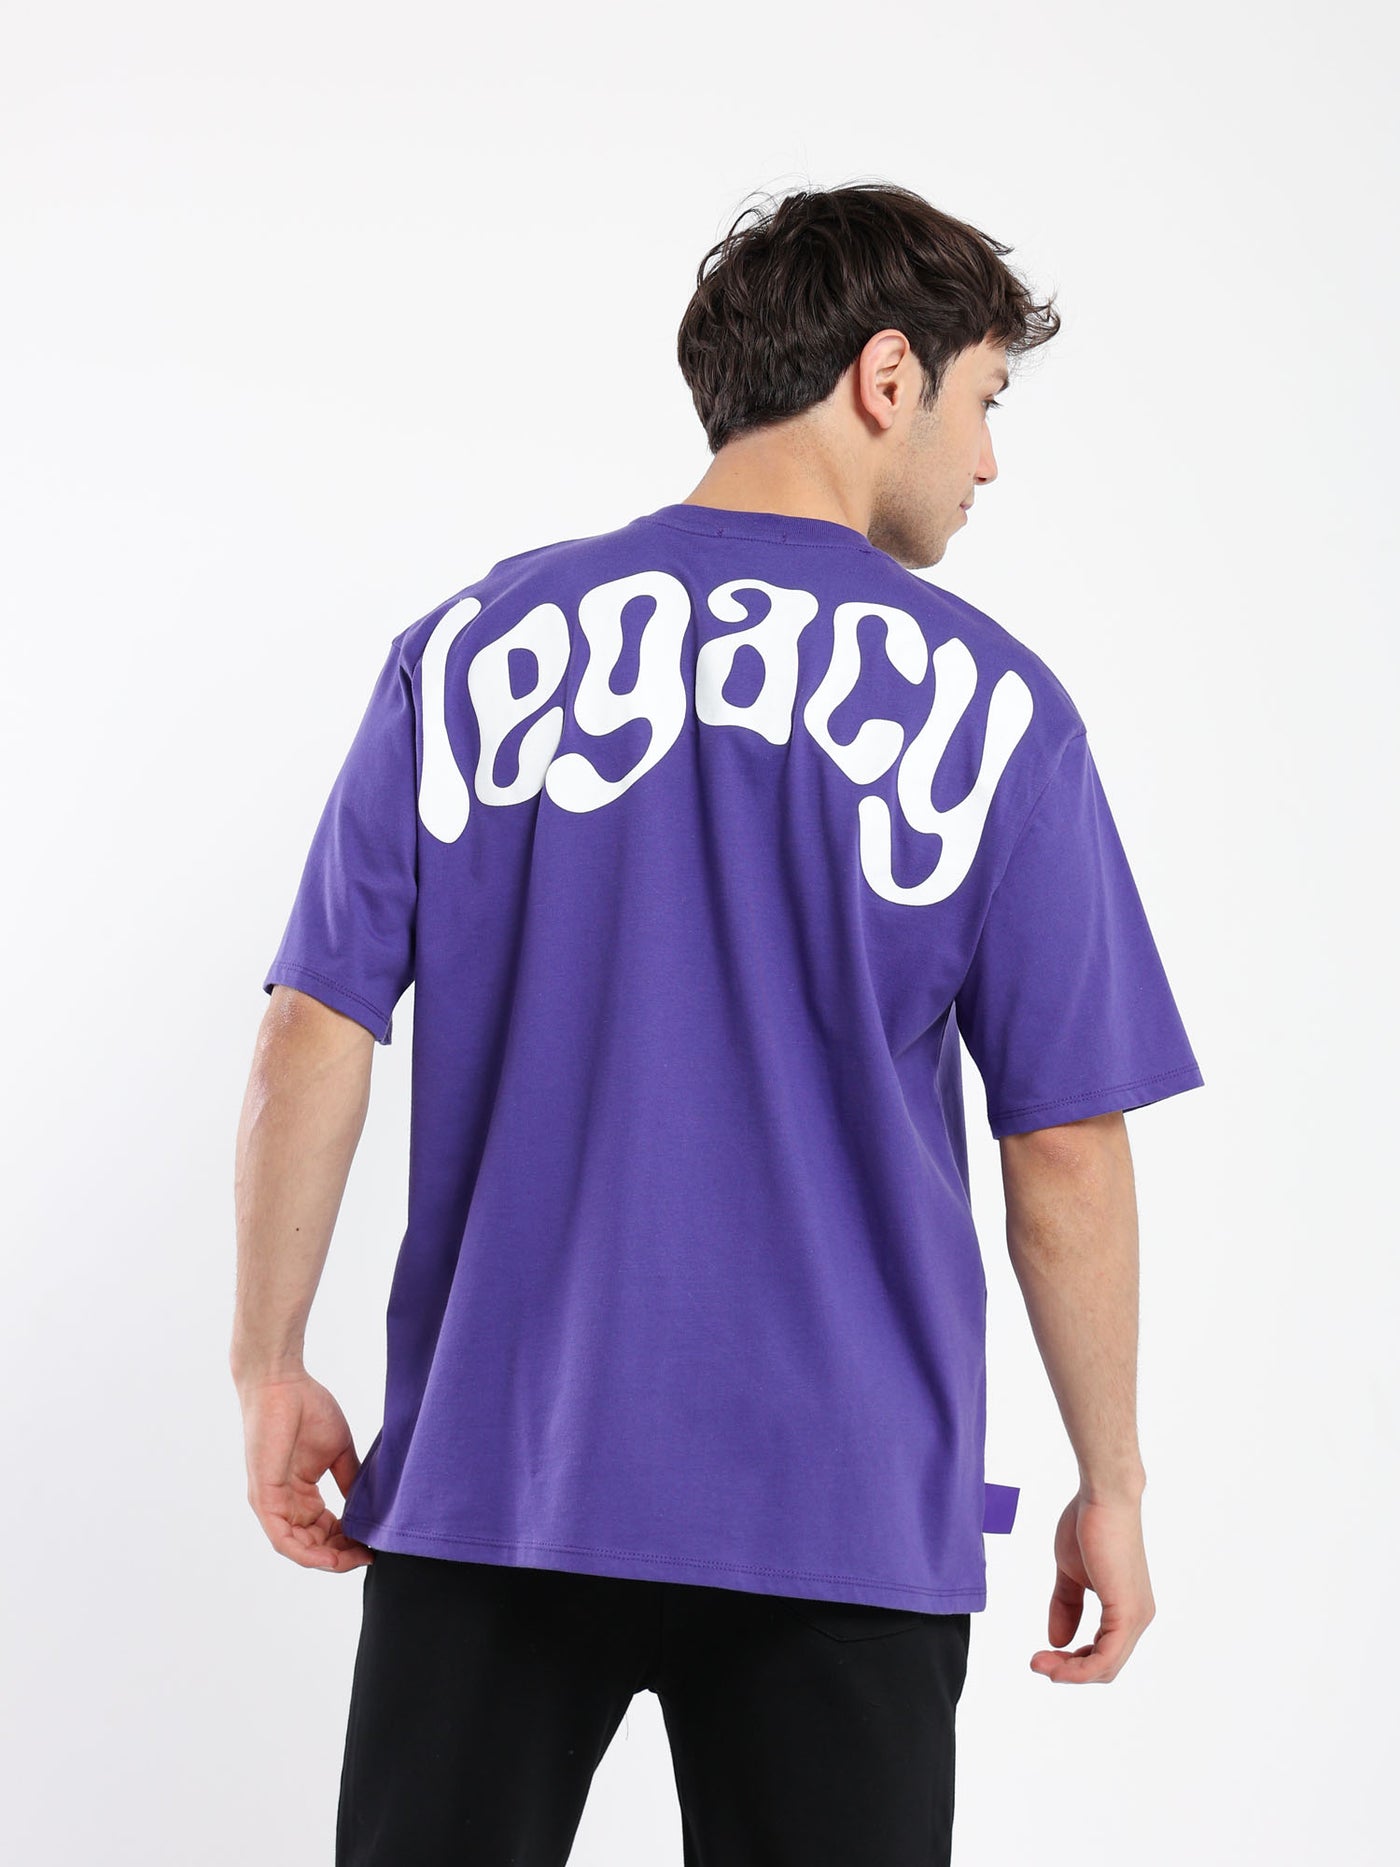 T-Shirt - "Legacy" Front and Back Print